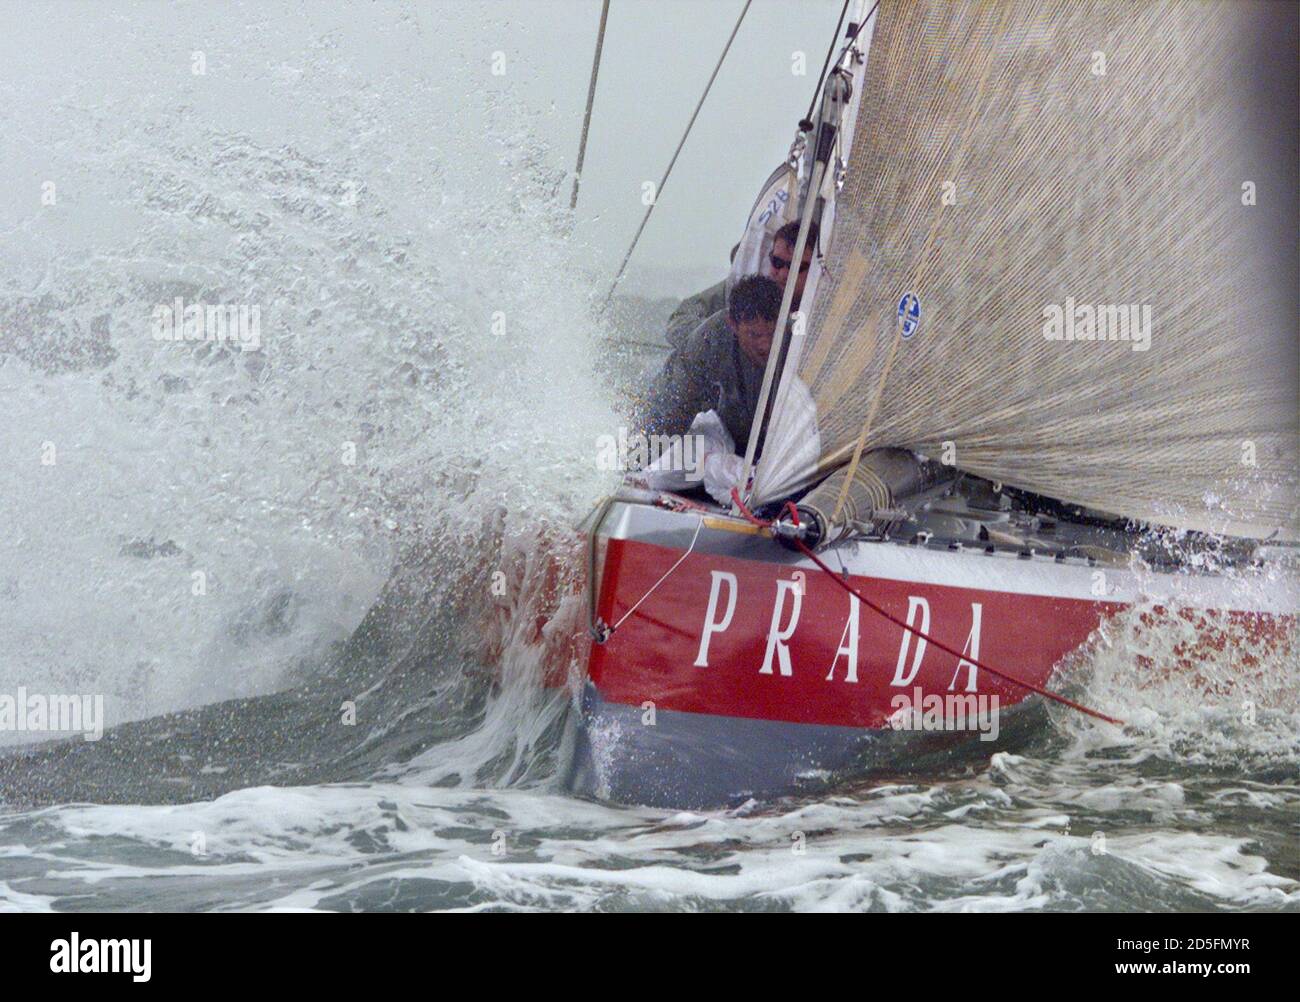 Italy's Prada number one boat ITA 45 crashes around a mark during practice  on Auckland's Hauraki Gulf February 14. Italy's Prada Challenge take on New  Zealand, the holders, for the America's Cup